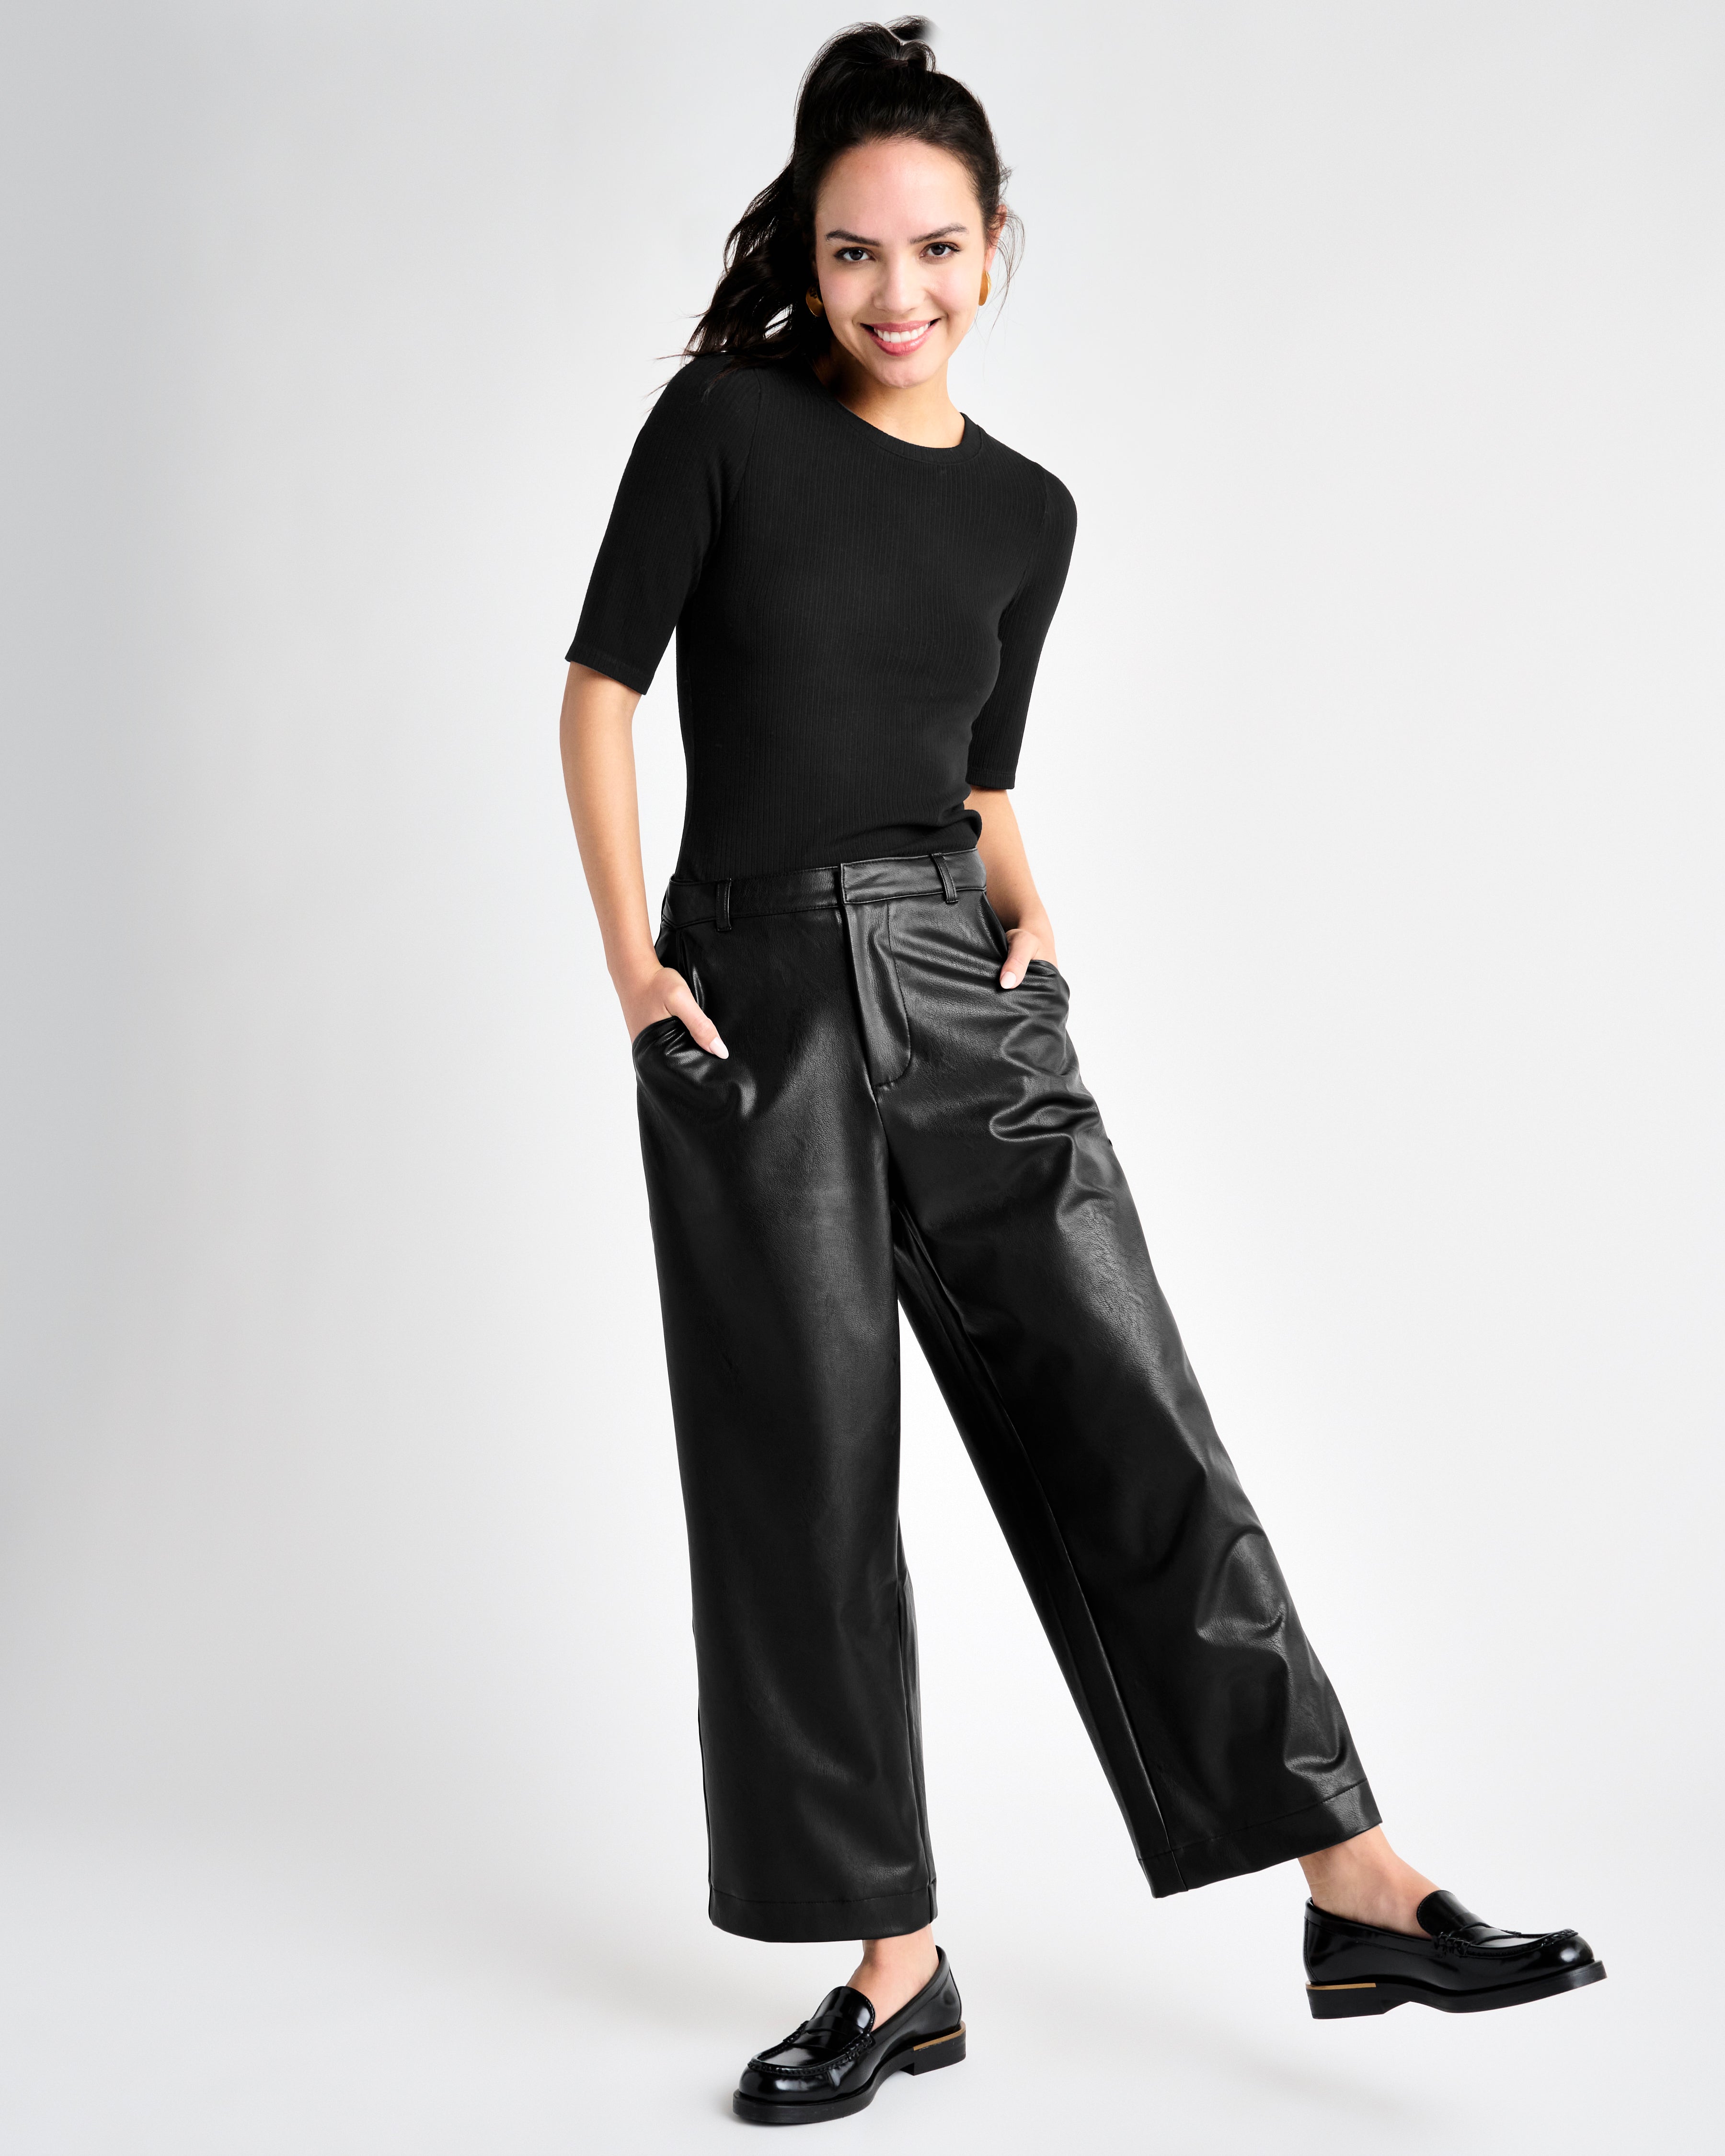 black vegan leather ankle length wide leg trousers styled with a black shirt